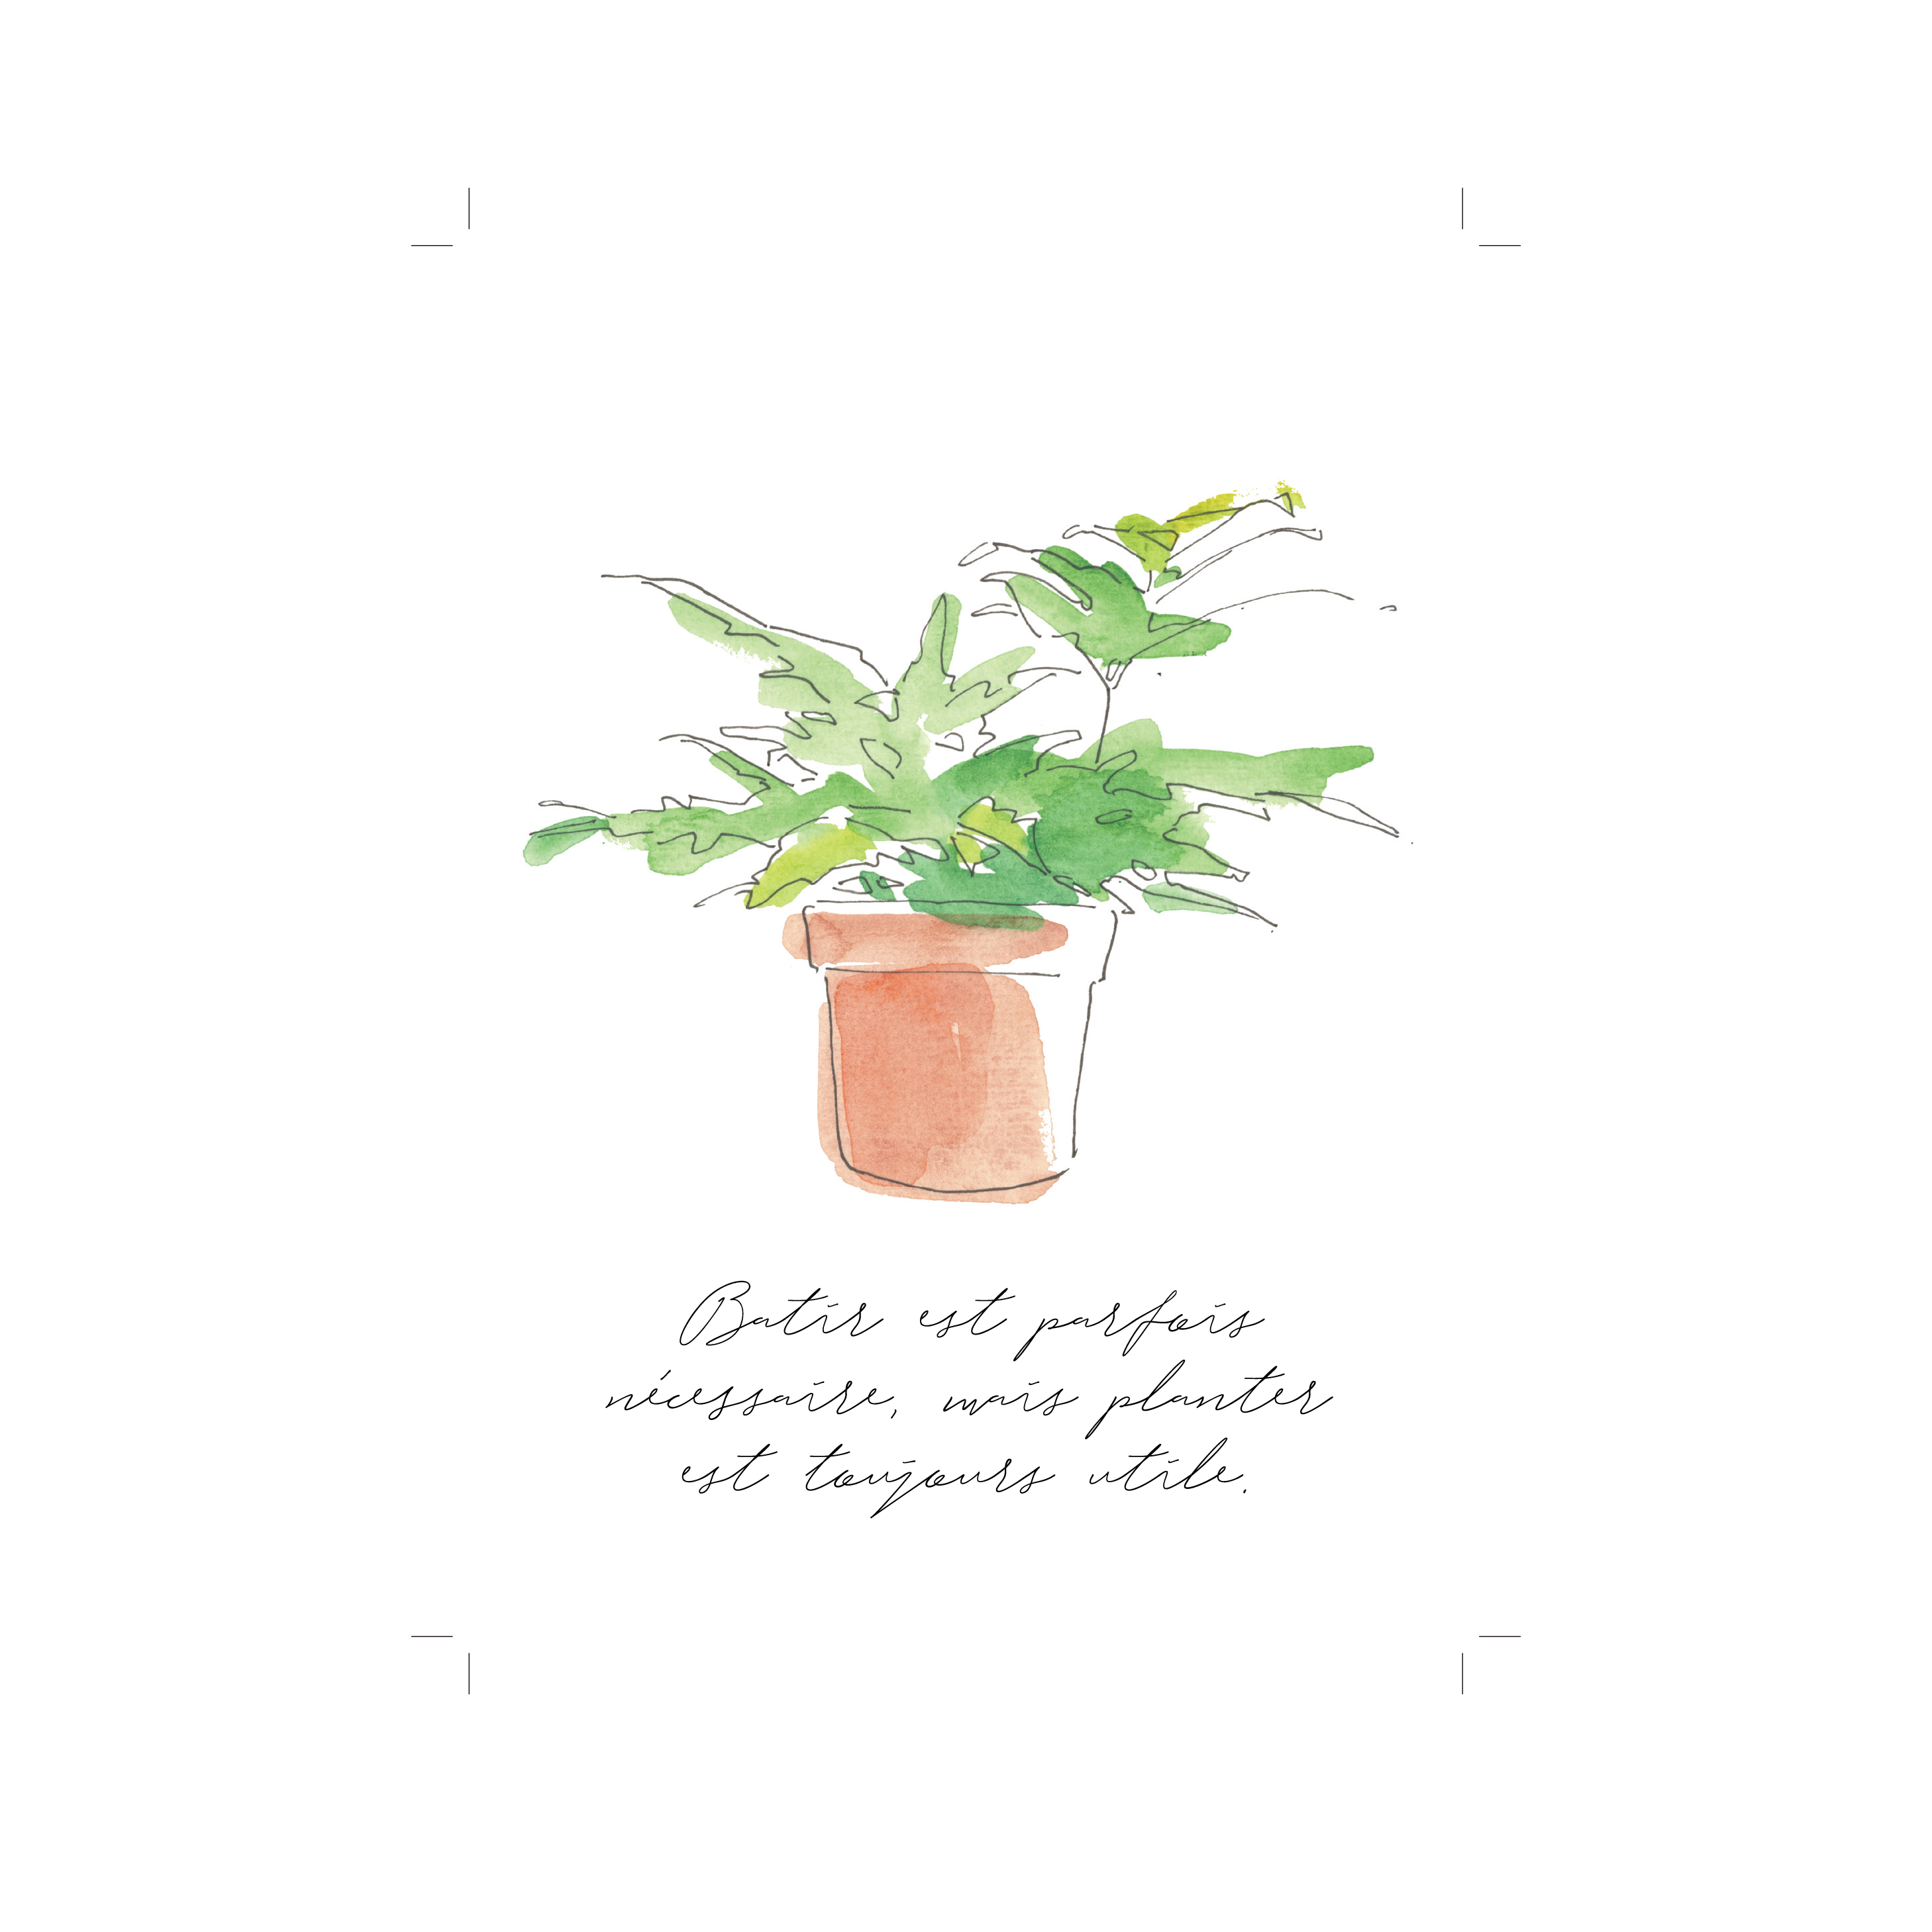 A watercolor painting of a potted plant with a quote from the best garden center near me.